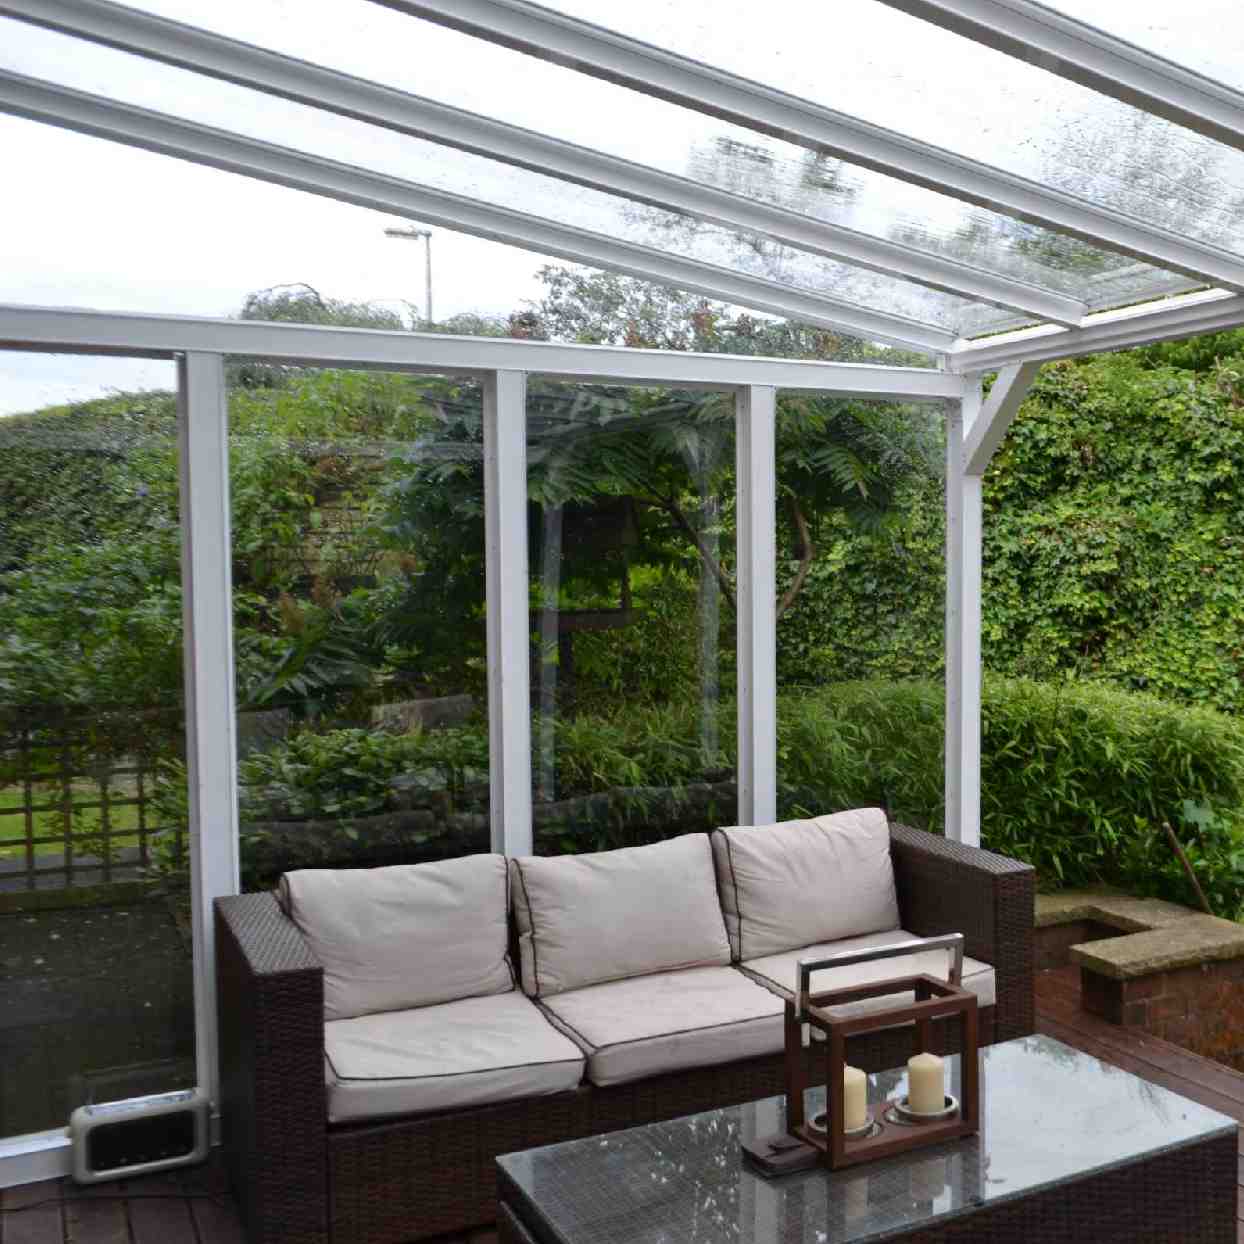 Buy Omega Verandah White with 6mm Glass Clear Plate Polycarbonate Glazing - 2.1m (W) x 1.5m (P), (2) Supporting Posts online today